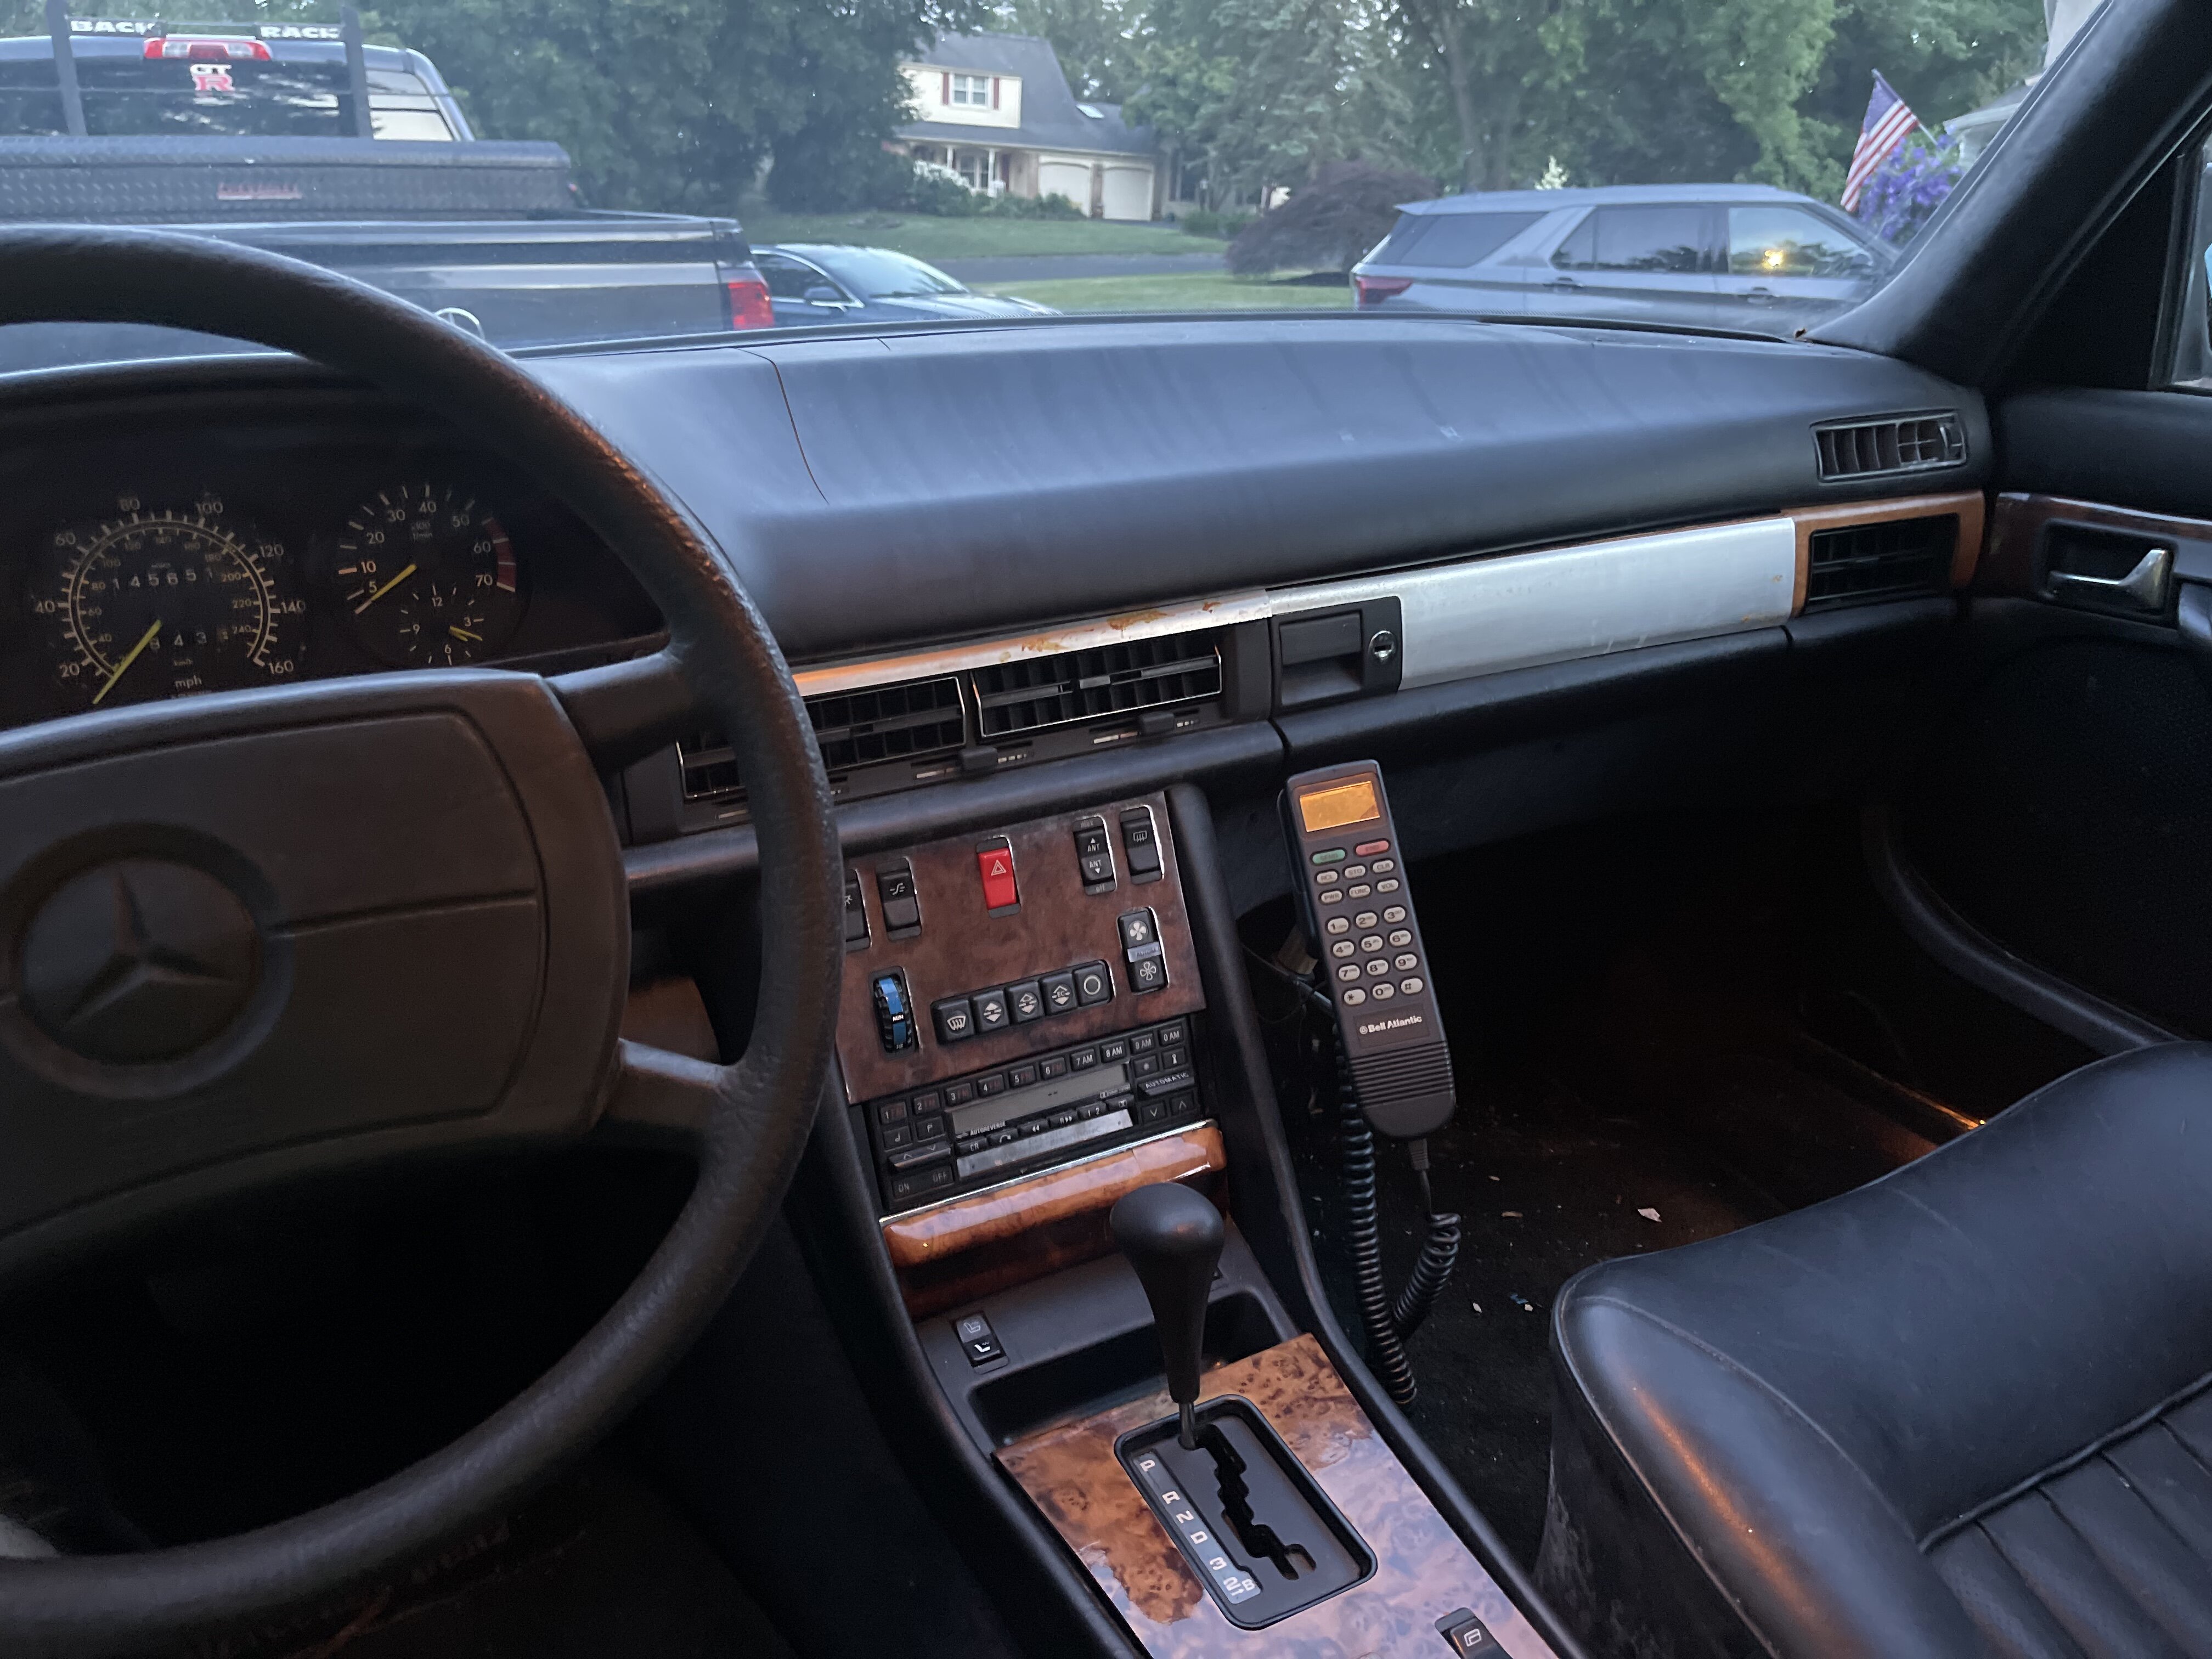 ‘85 Mercedes 500SEL. 4 heated seats, the rear seats recline aswell!